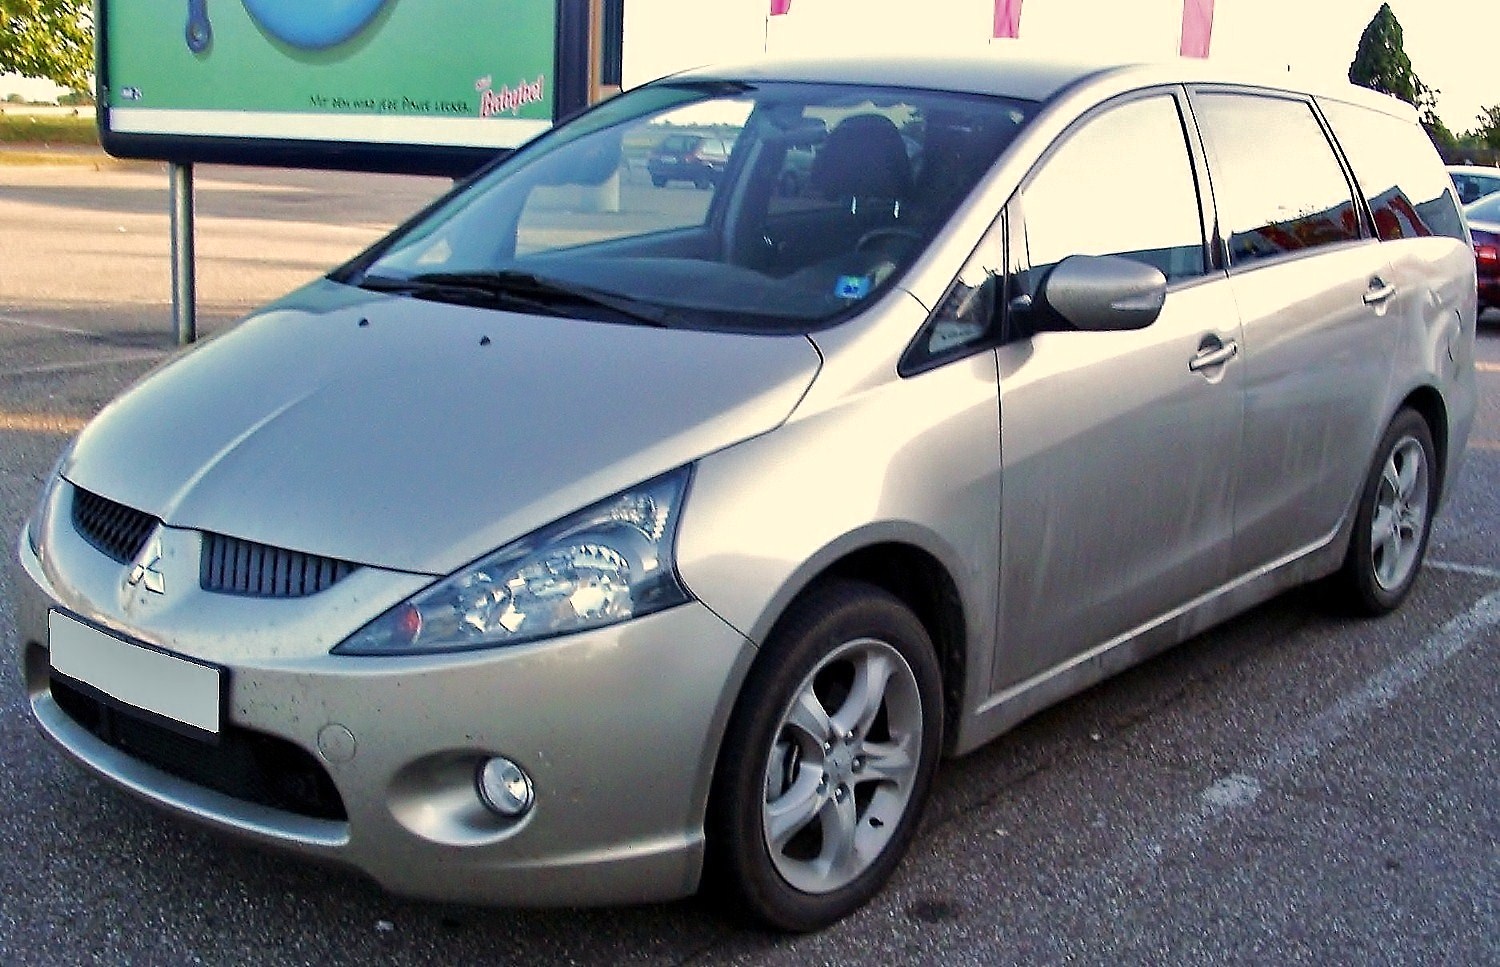 Mitsubishi Grandis 2009 Review, Amazing Pictures and